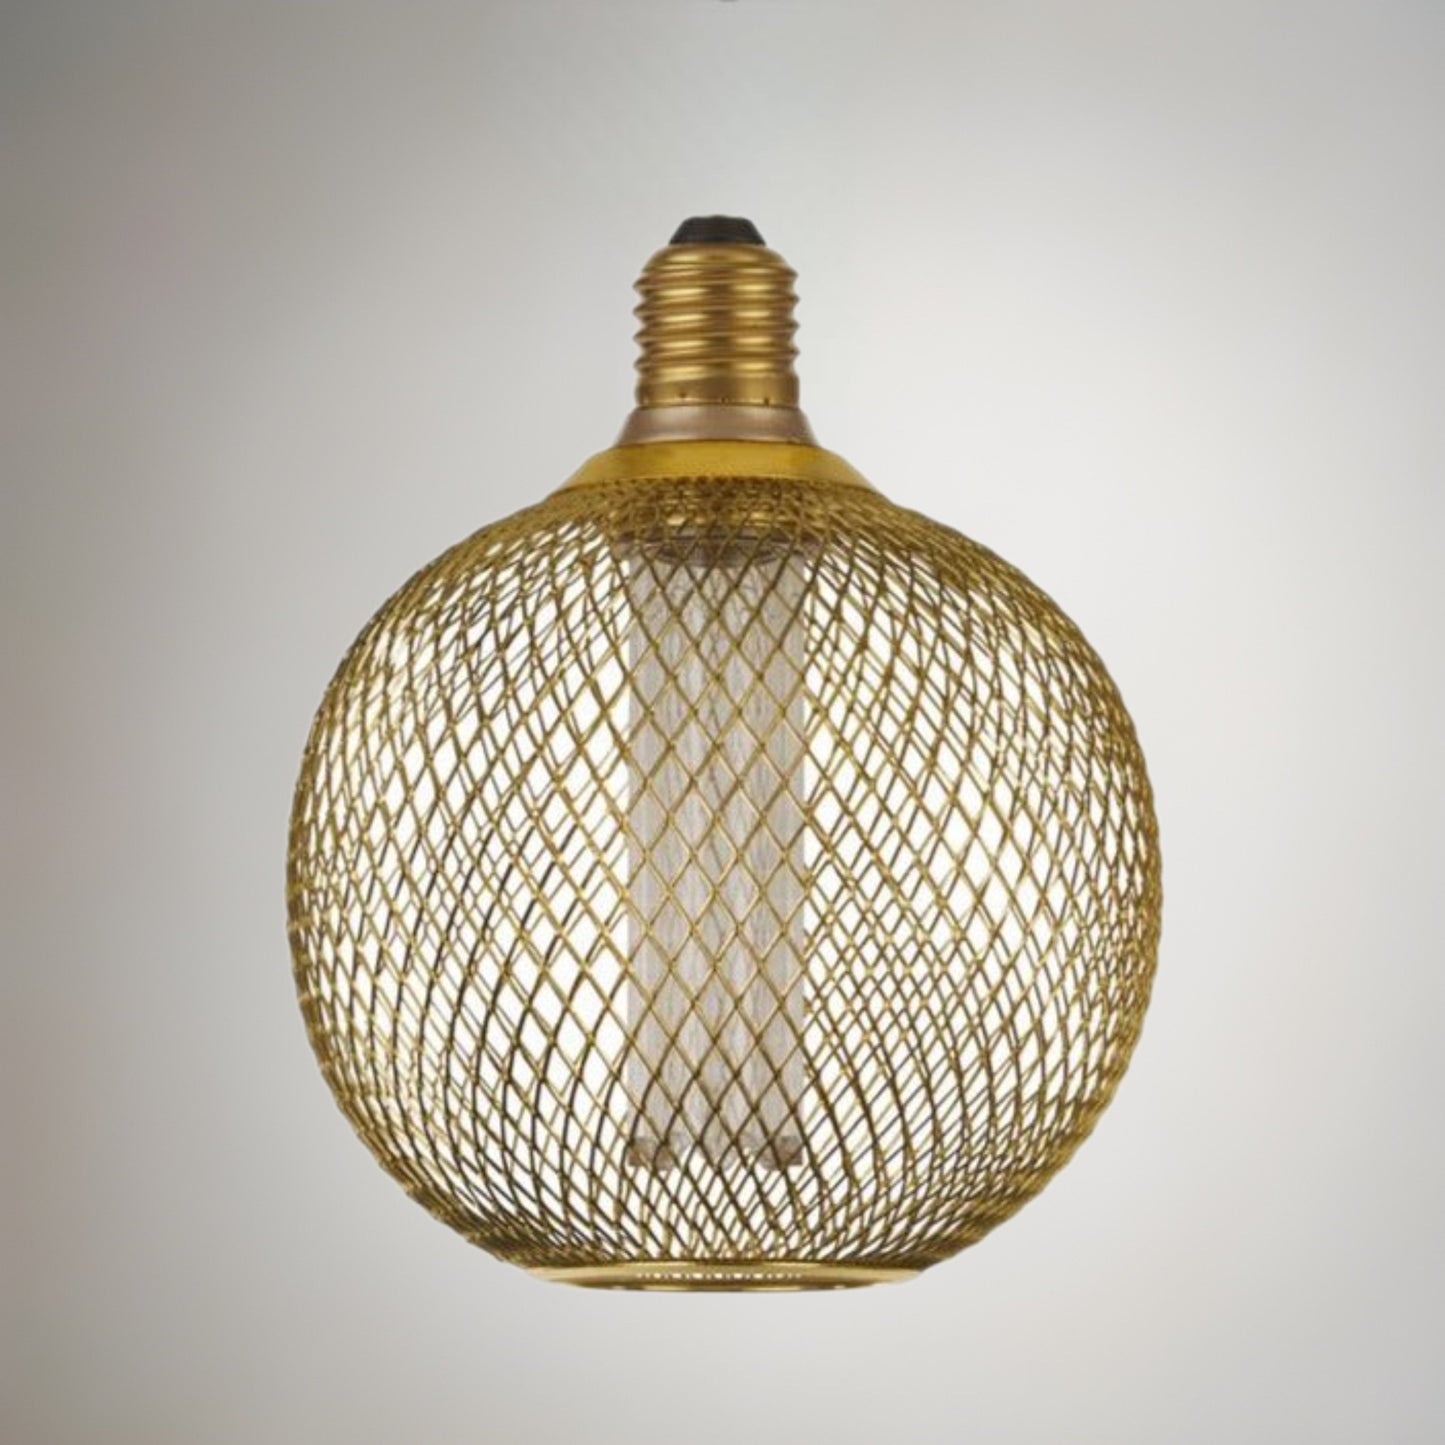 Our decorative gold mesh E27 LED globe bulb provides a unique aesthetic, blending seamlessly into many decors. Made from gold wire mesh in round cross hatch pattern giving this bulb a real industrial feel. This energy-saving bulb is perfect for exposed lighting designs fits any standard E27 lamp holder.